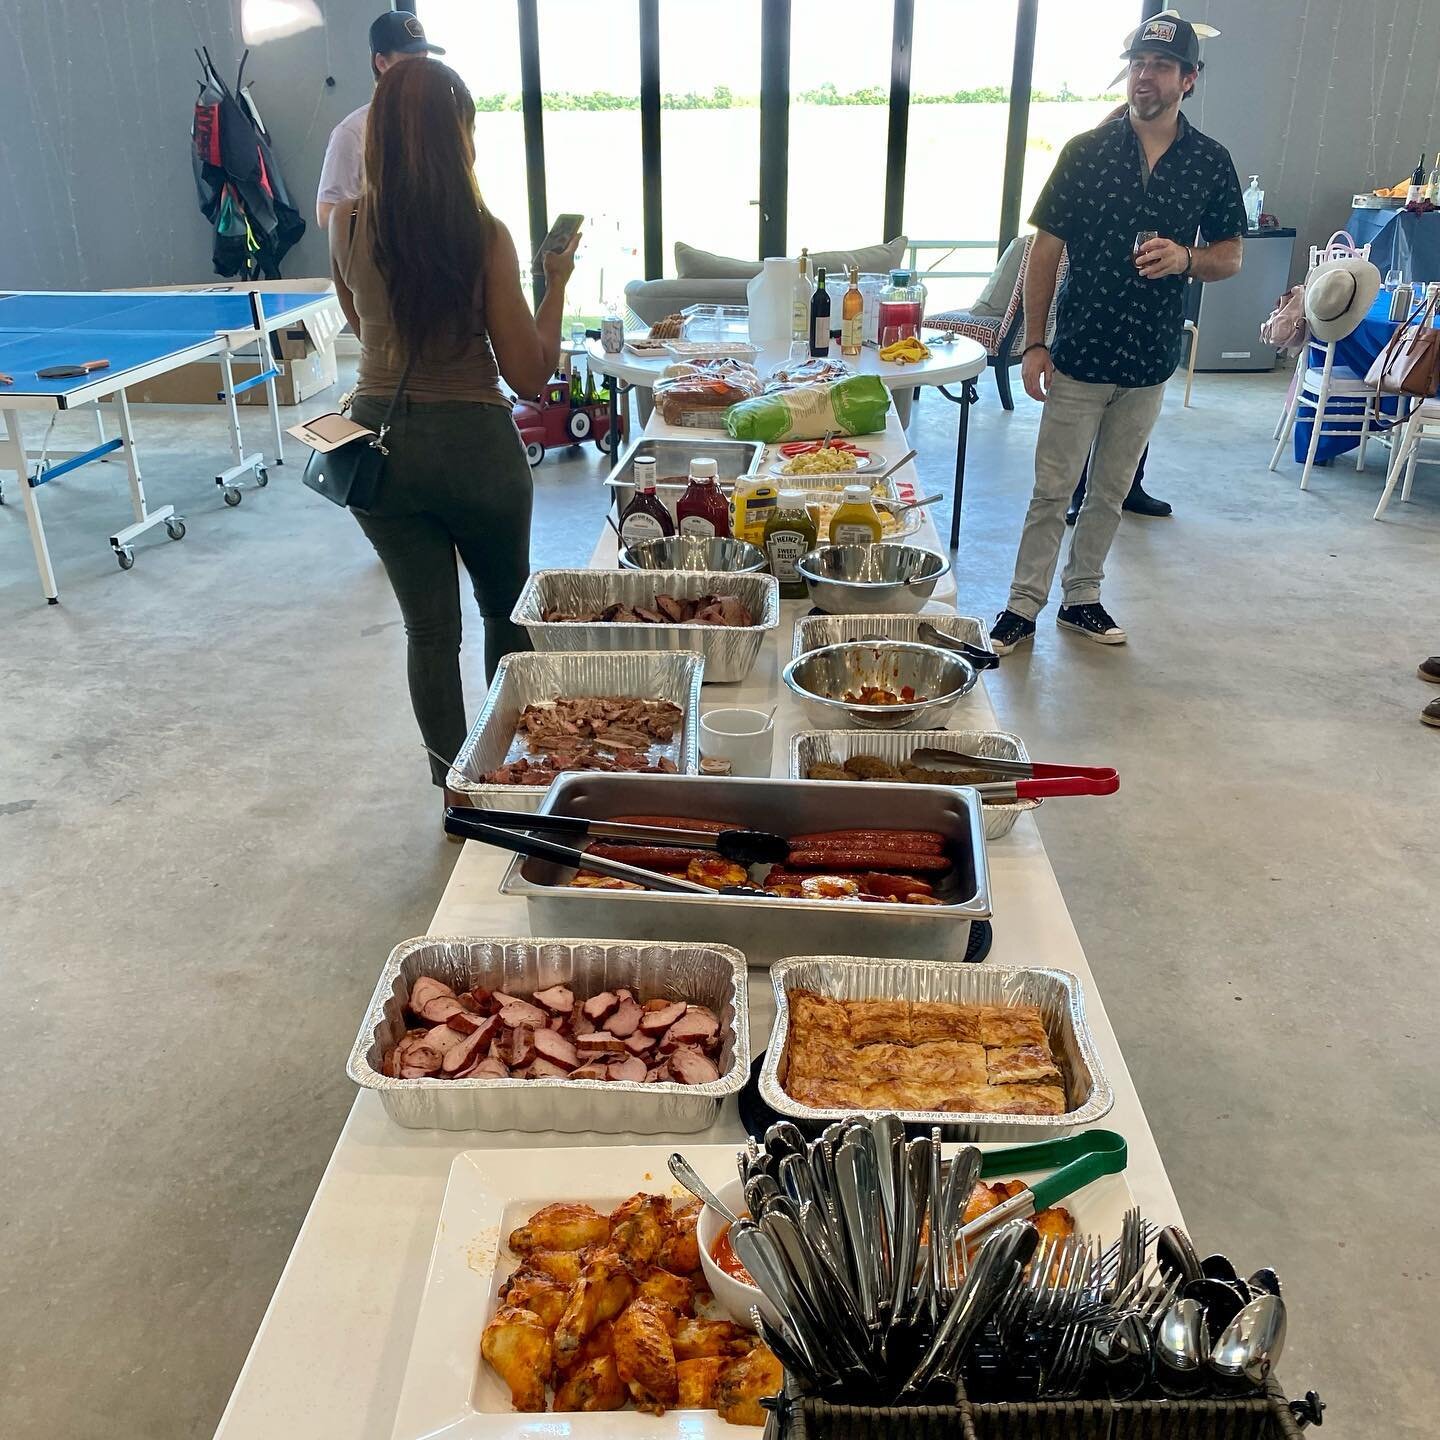 We enjoyed hosting another dinner club at FarmResort. 🥘 🍷 

Good food, good people. 
Dinner club: BBQ Theme.
The grilled peaches were a new experience for us and D-lish 🍑 and we were able to try some of our new beef on the grill. 

Plus we got to 